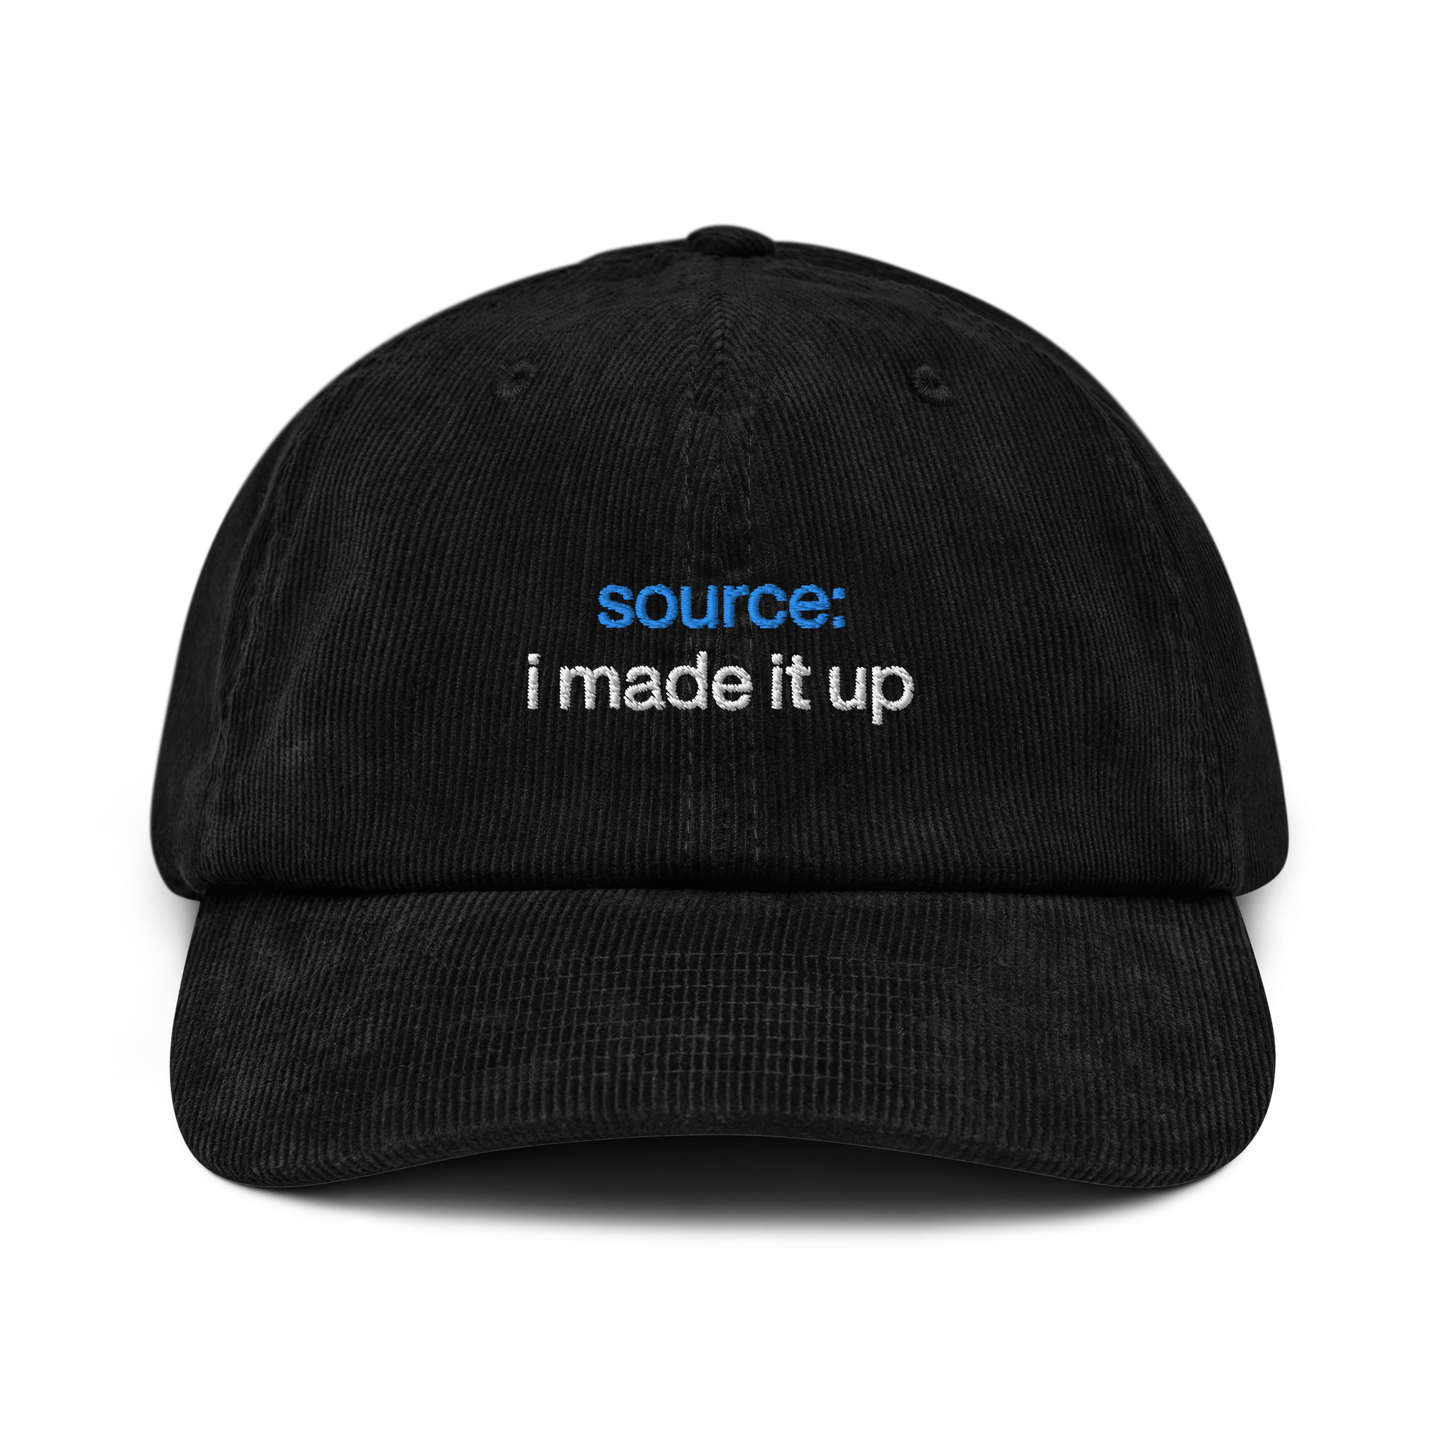 source: i made it up hat